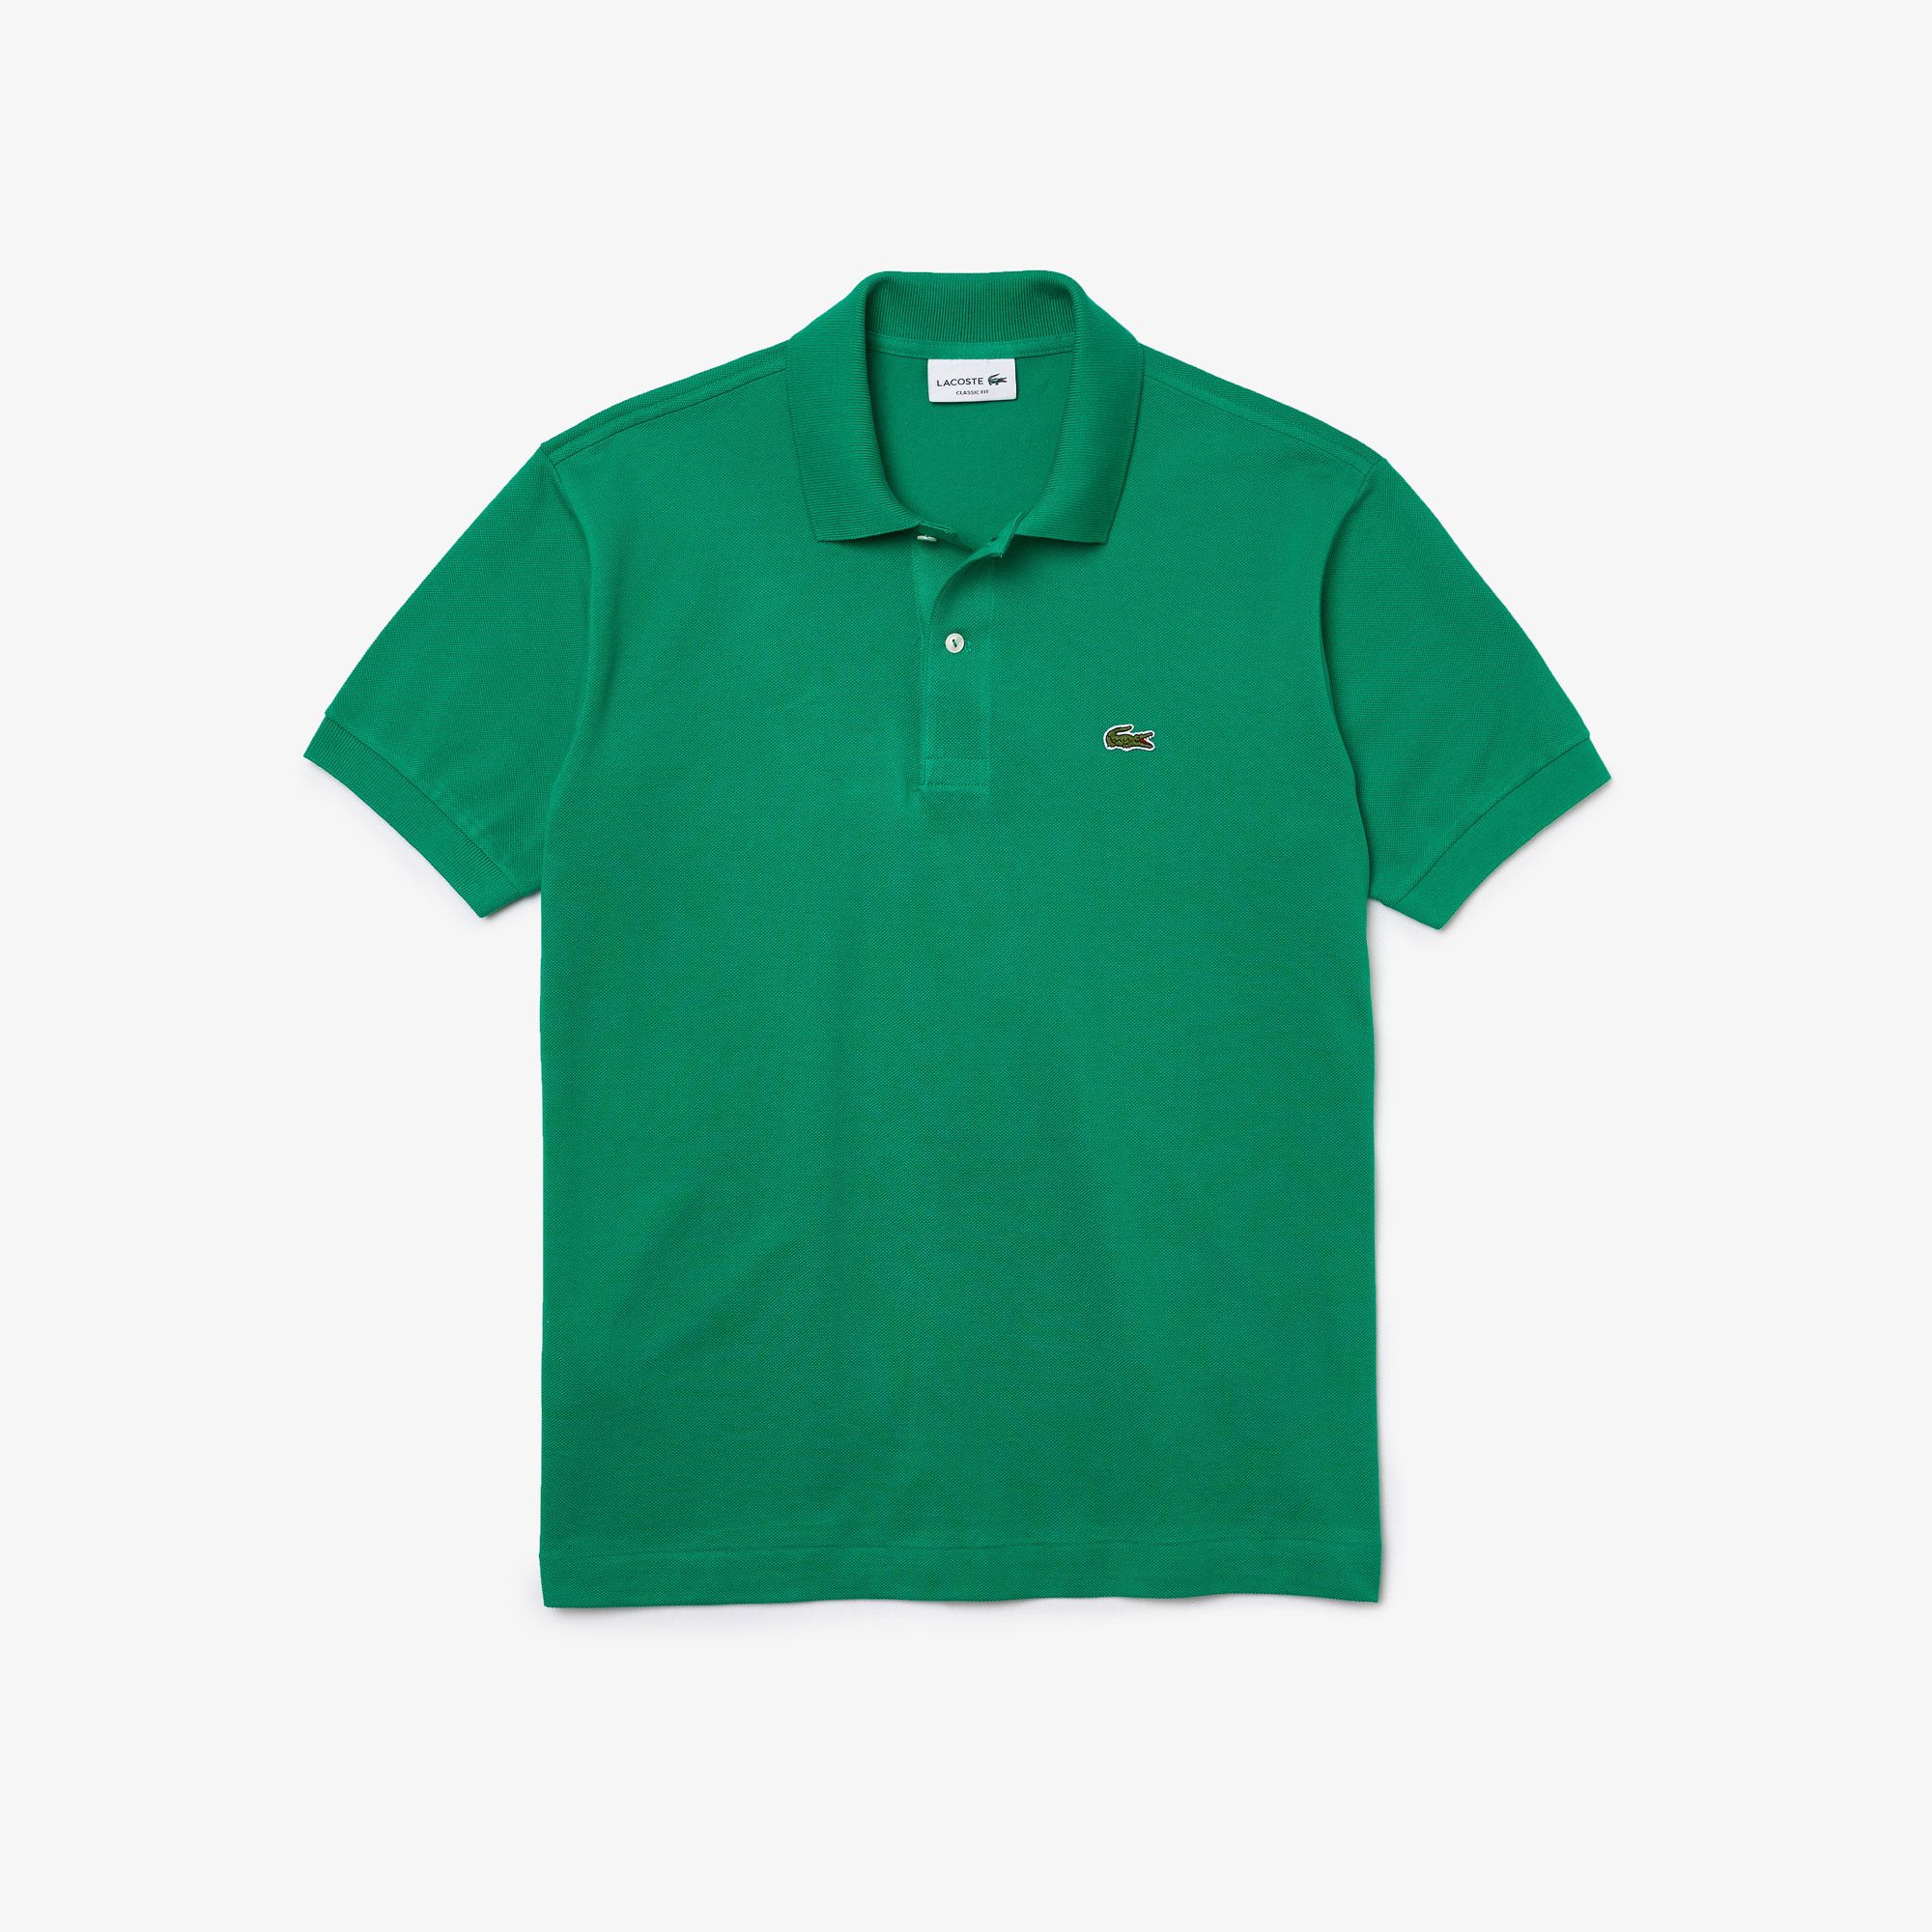  Lacoste Classic Fit L.12.12 Polo Shirt - Green 